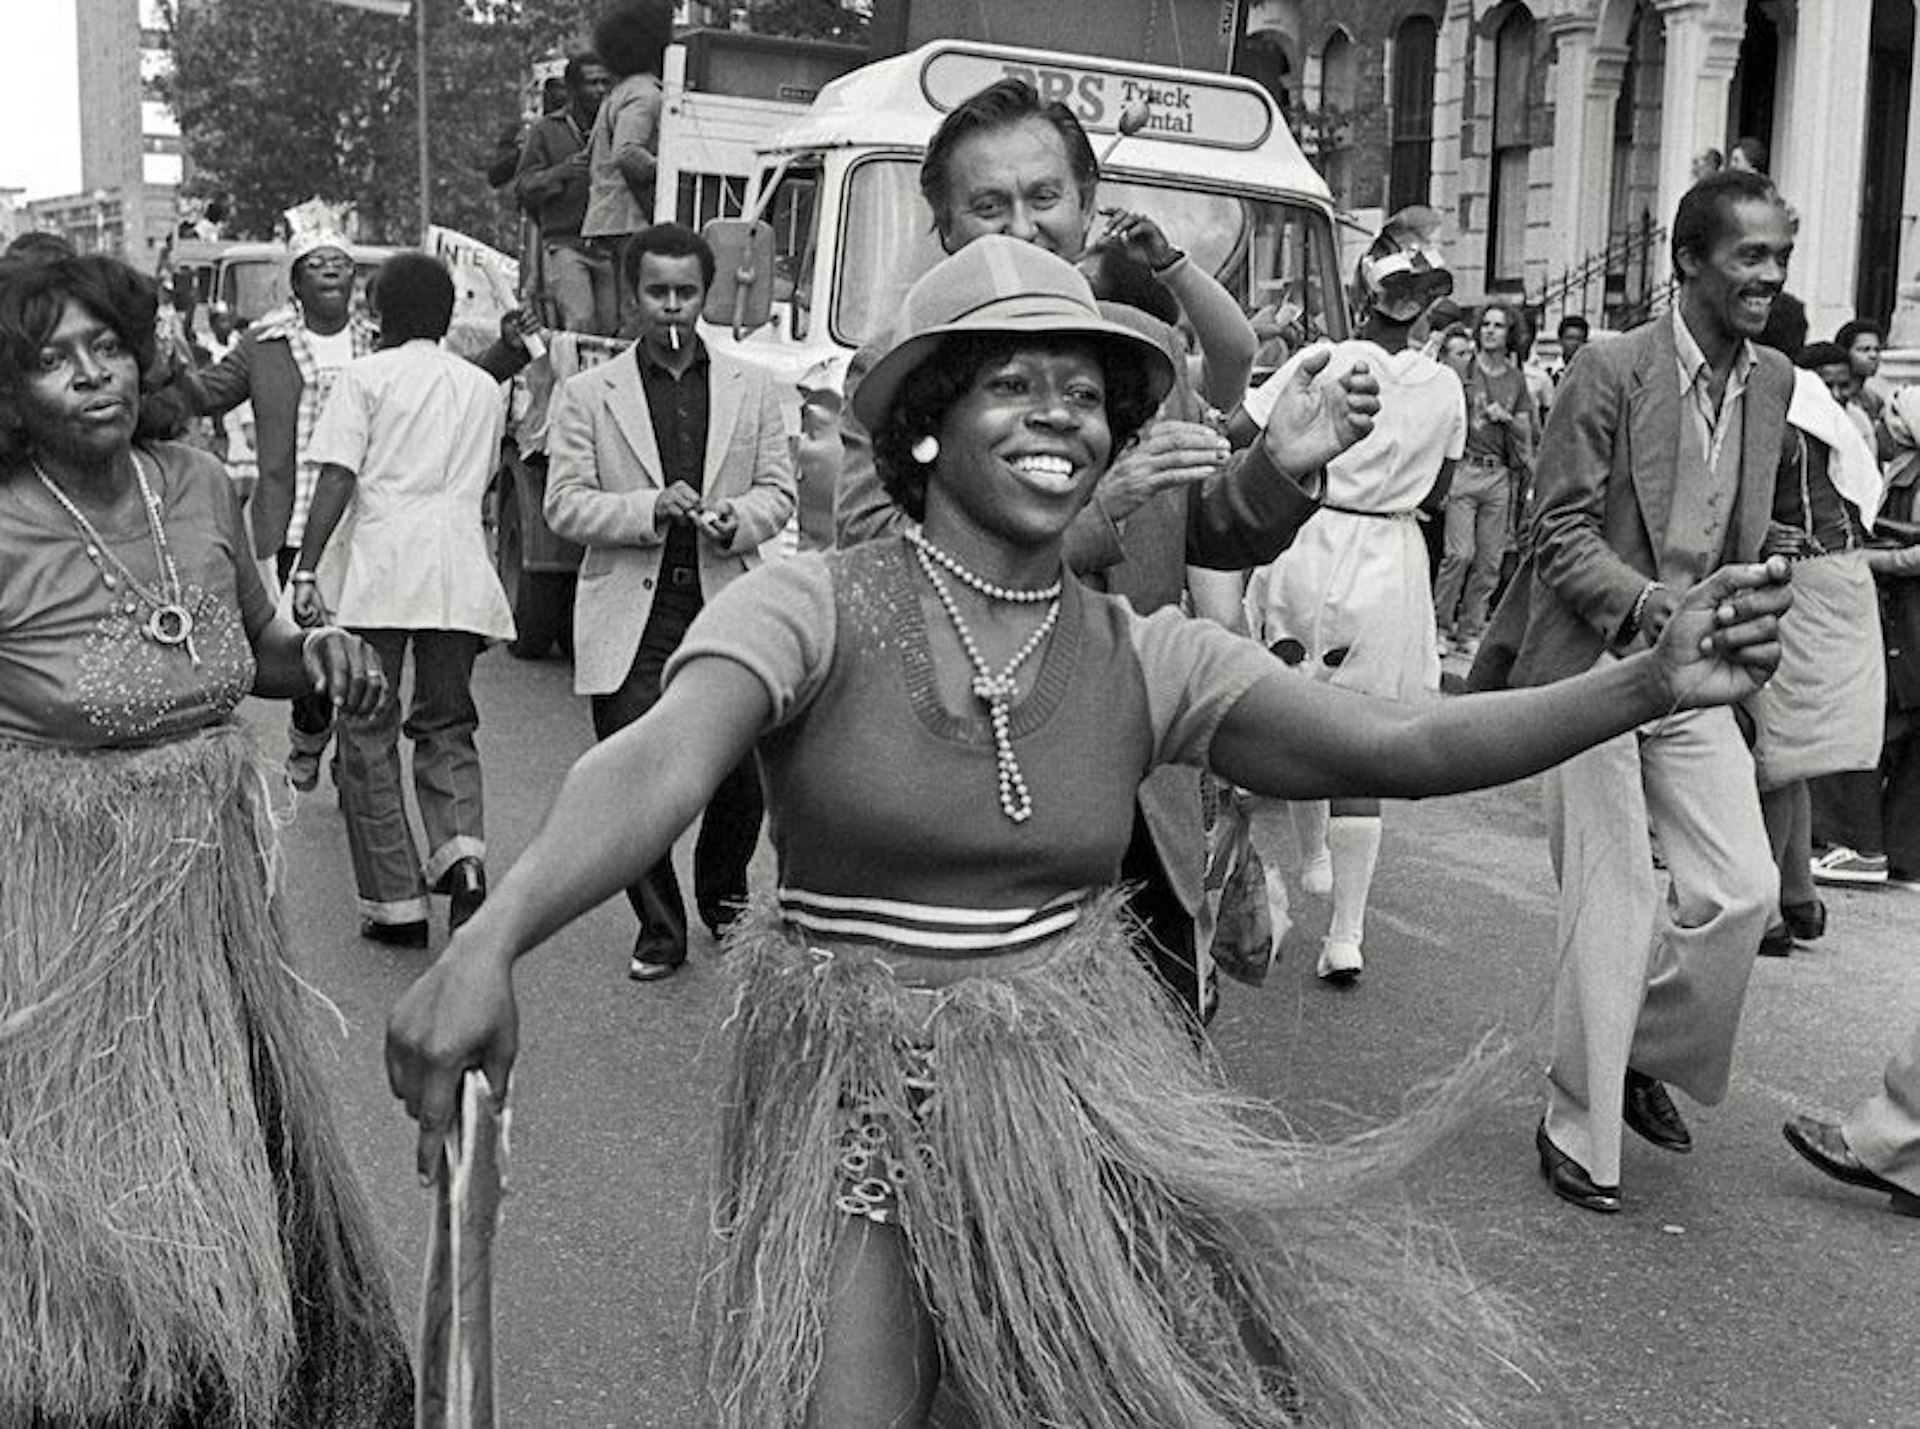 Photos capturing the soul of Notting Hill in the ‘70s